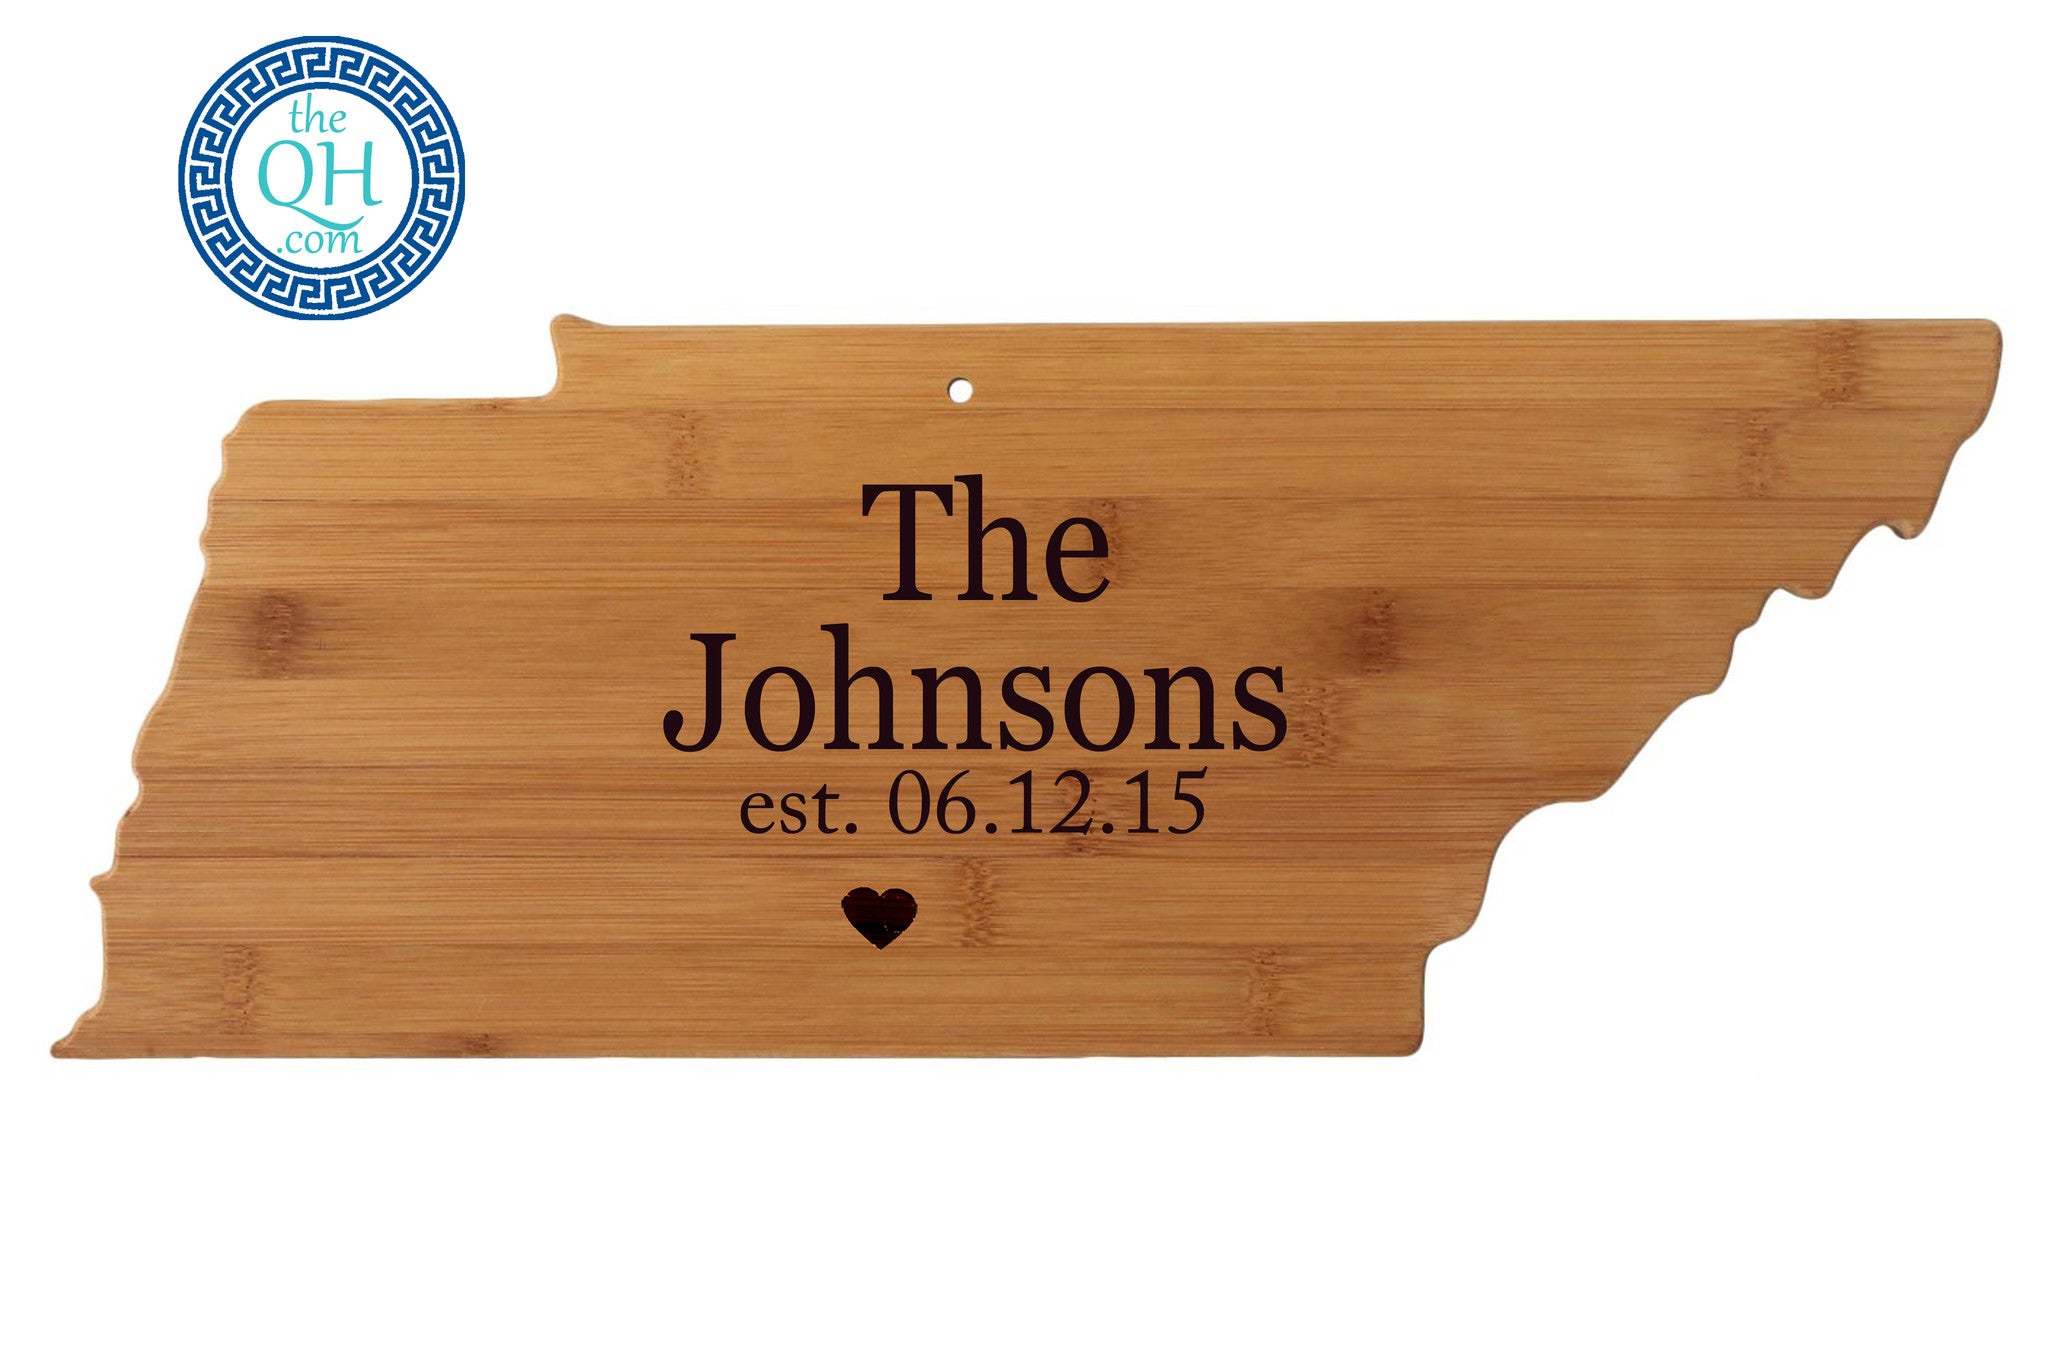 Tennessee Shaped Cutting Board Serving Tray Gift